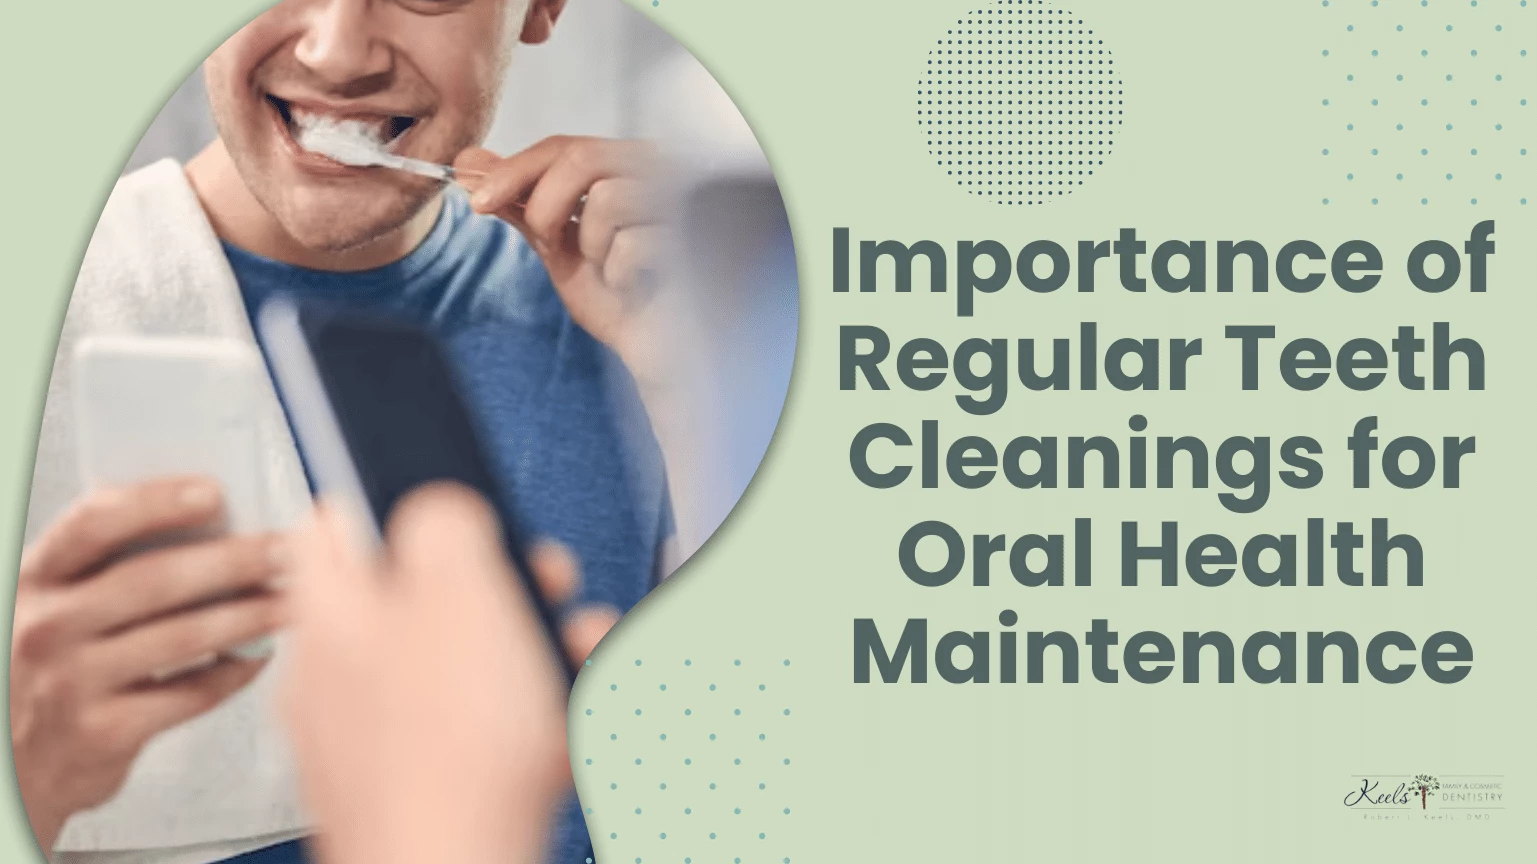 Importance of Regular Teeth Cleanings for Oral Health Maintenance